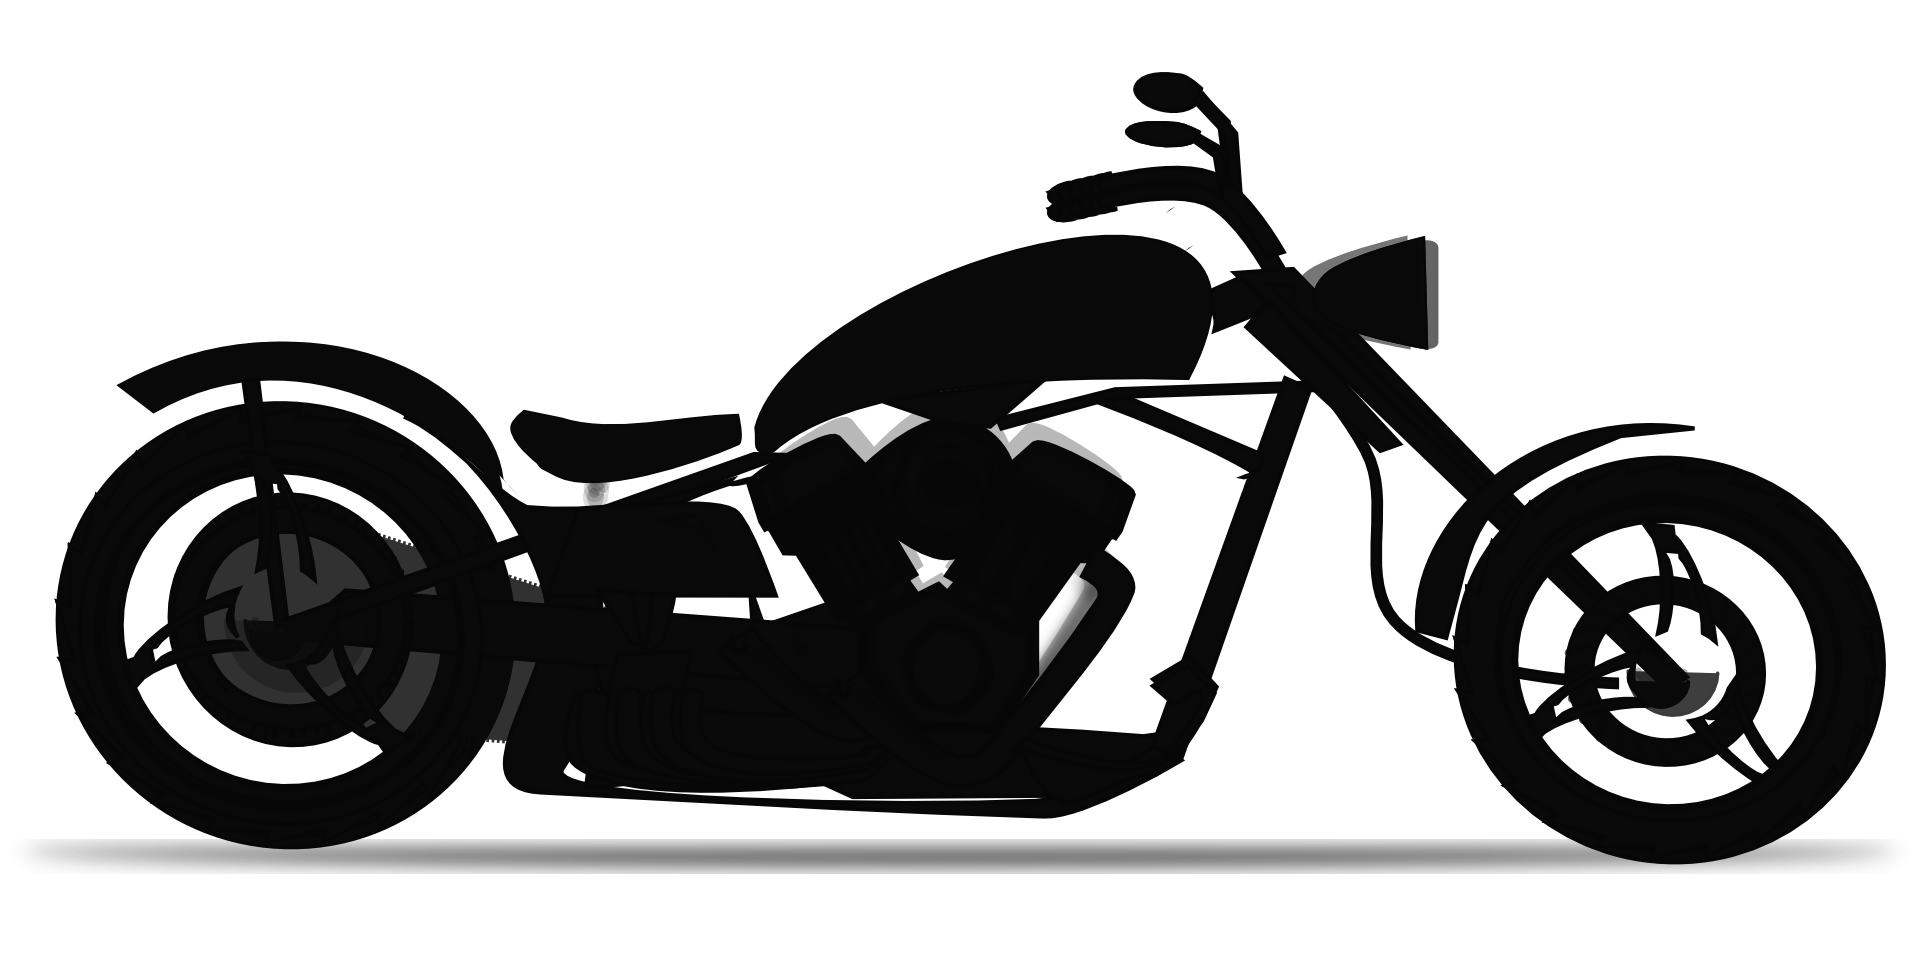 Motorcycle clipart vector, Motorcycle vector Transparent FREE for download on WebStockReview 2022